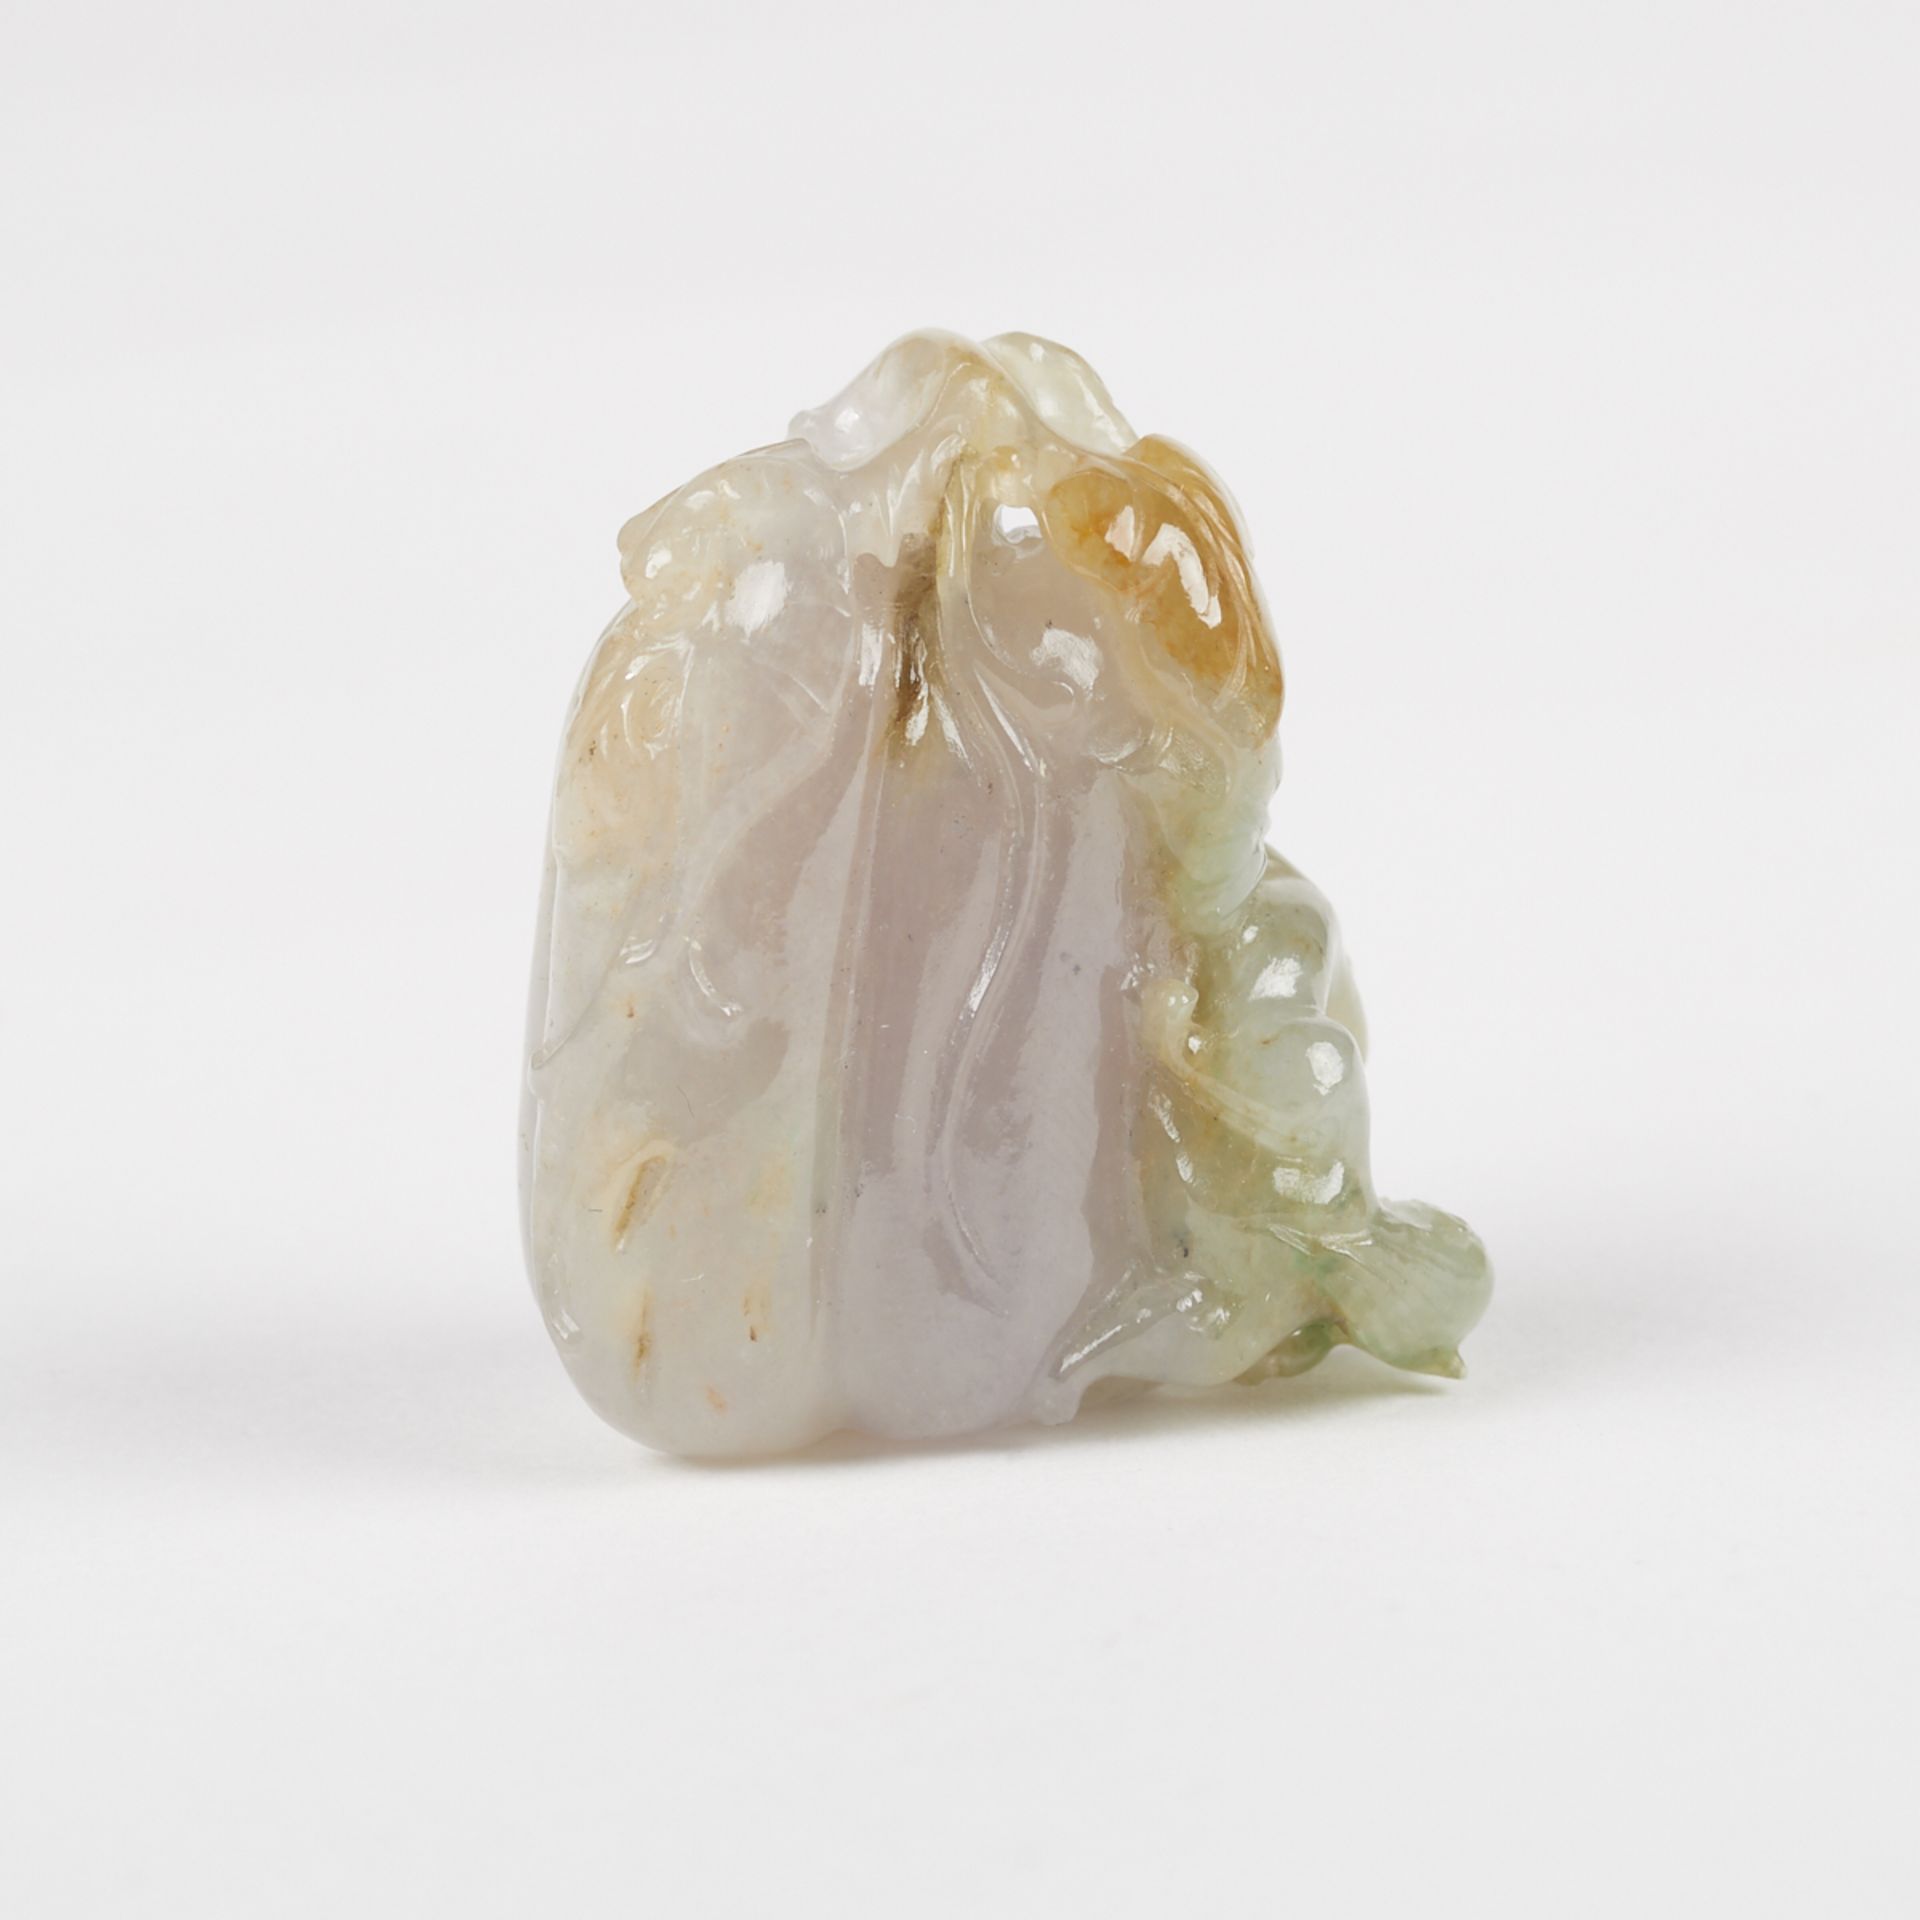 Chinese Lavender Celadon Jade Melon Carving - Image 4 of 7